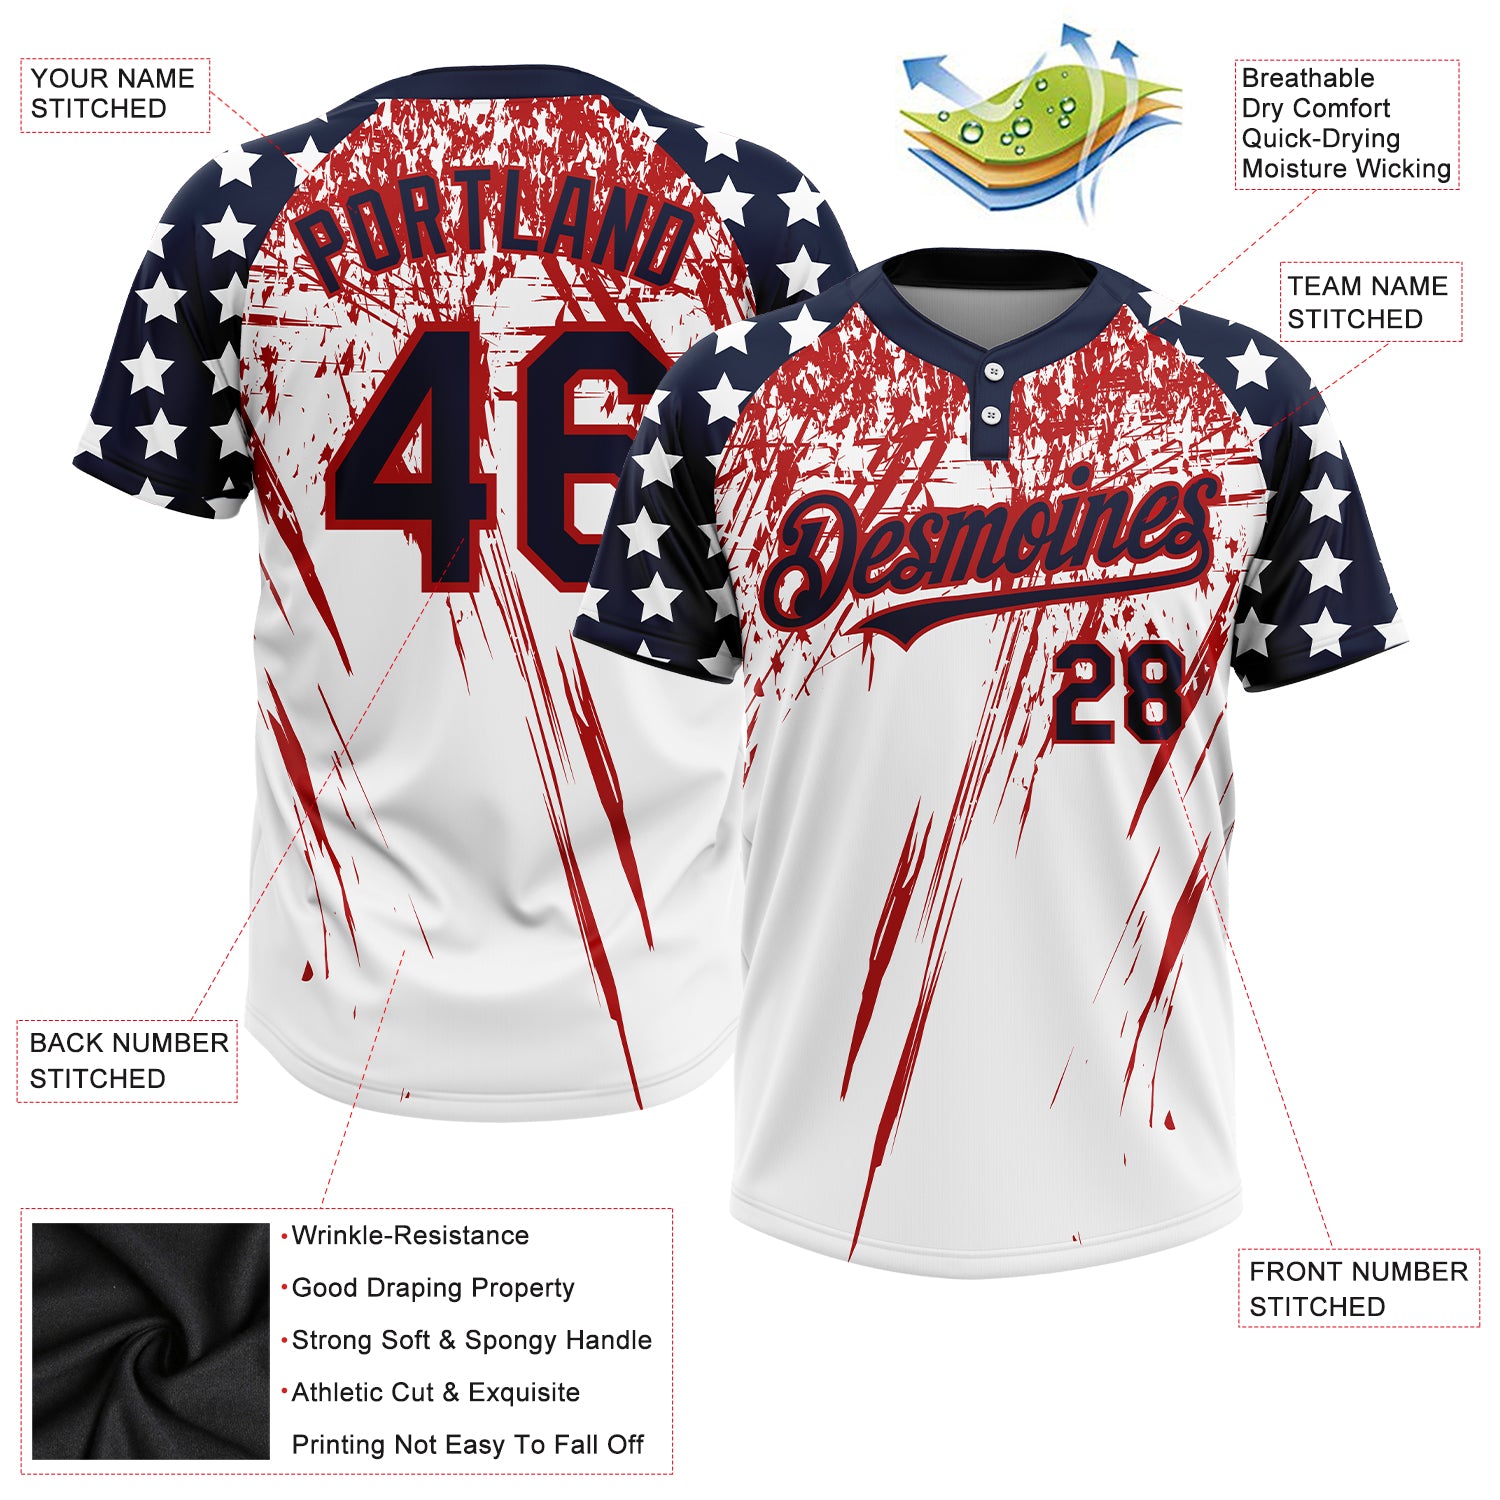 Custom Softball Jersey White Navy-Red 3D American Flag Fashion Two-Button Unisex Men's Size:XL